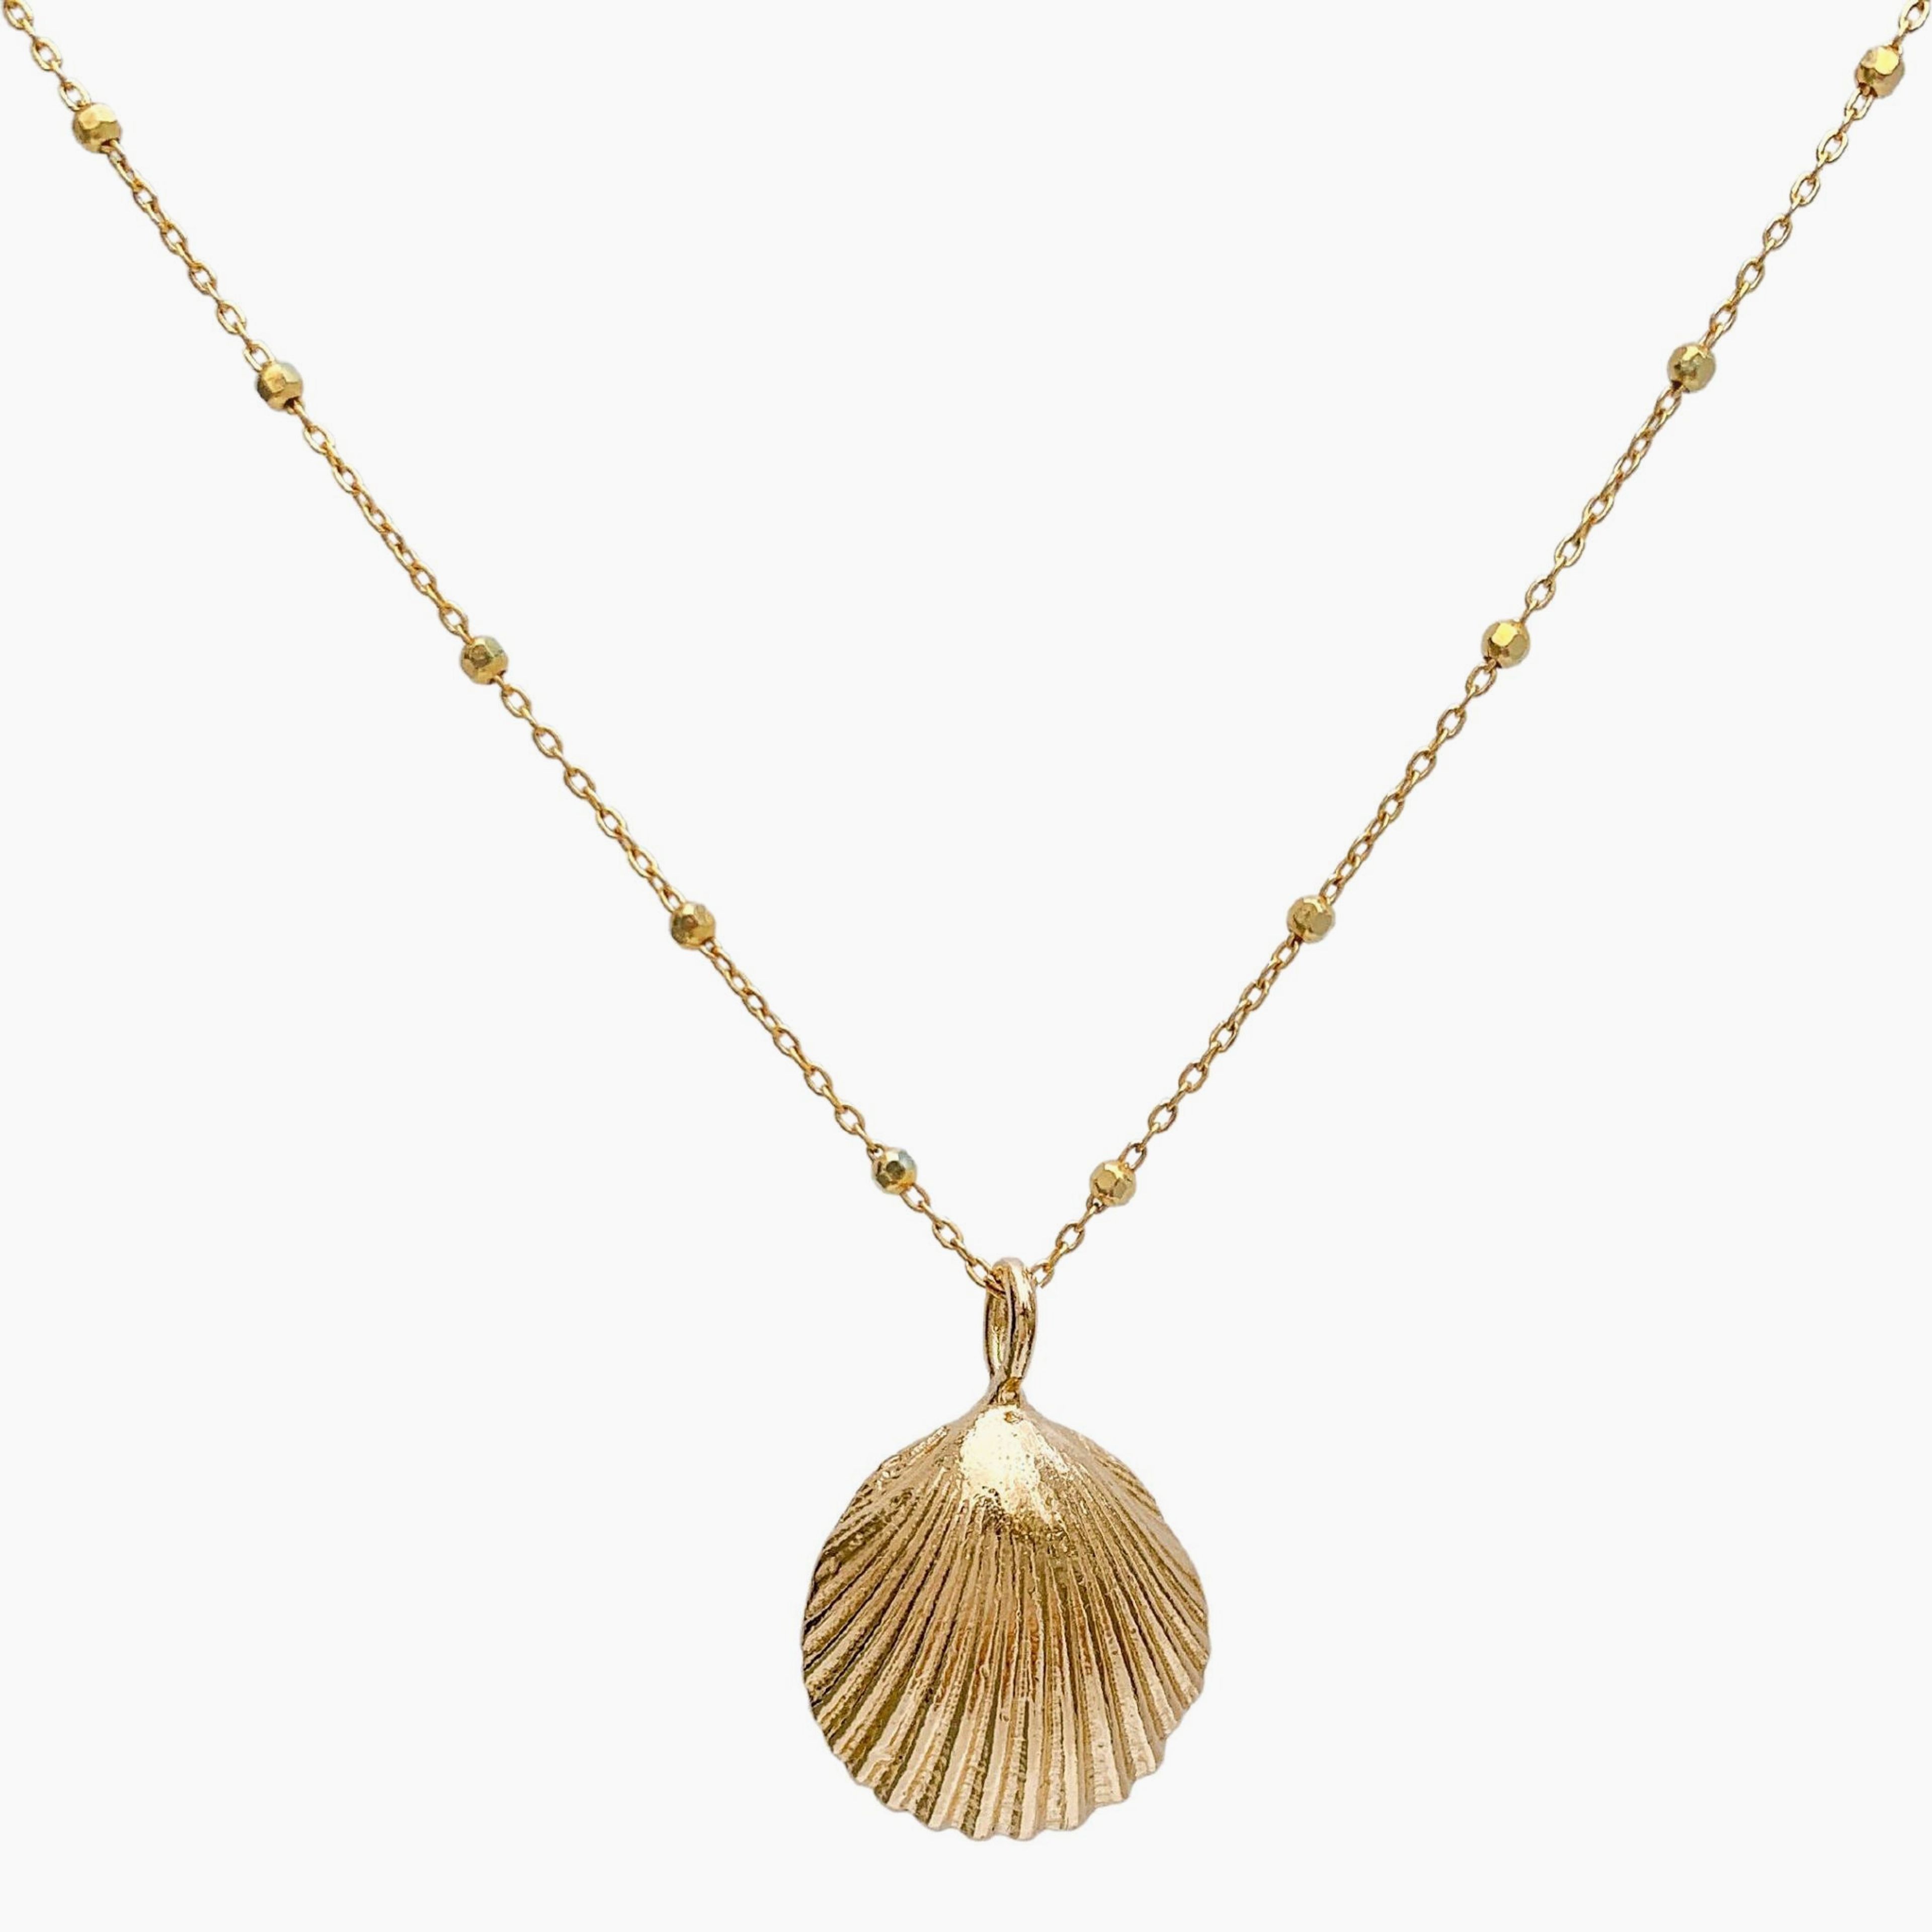 Seashell Necklace | Large | Solid 14k Gold